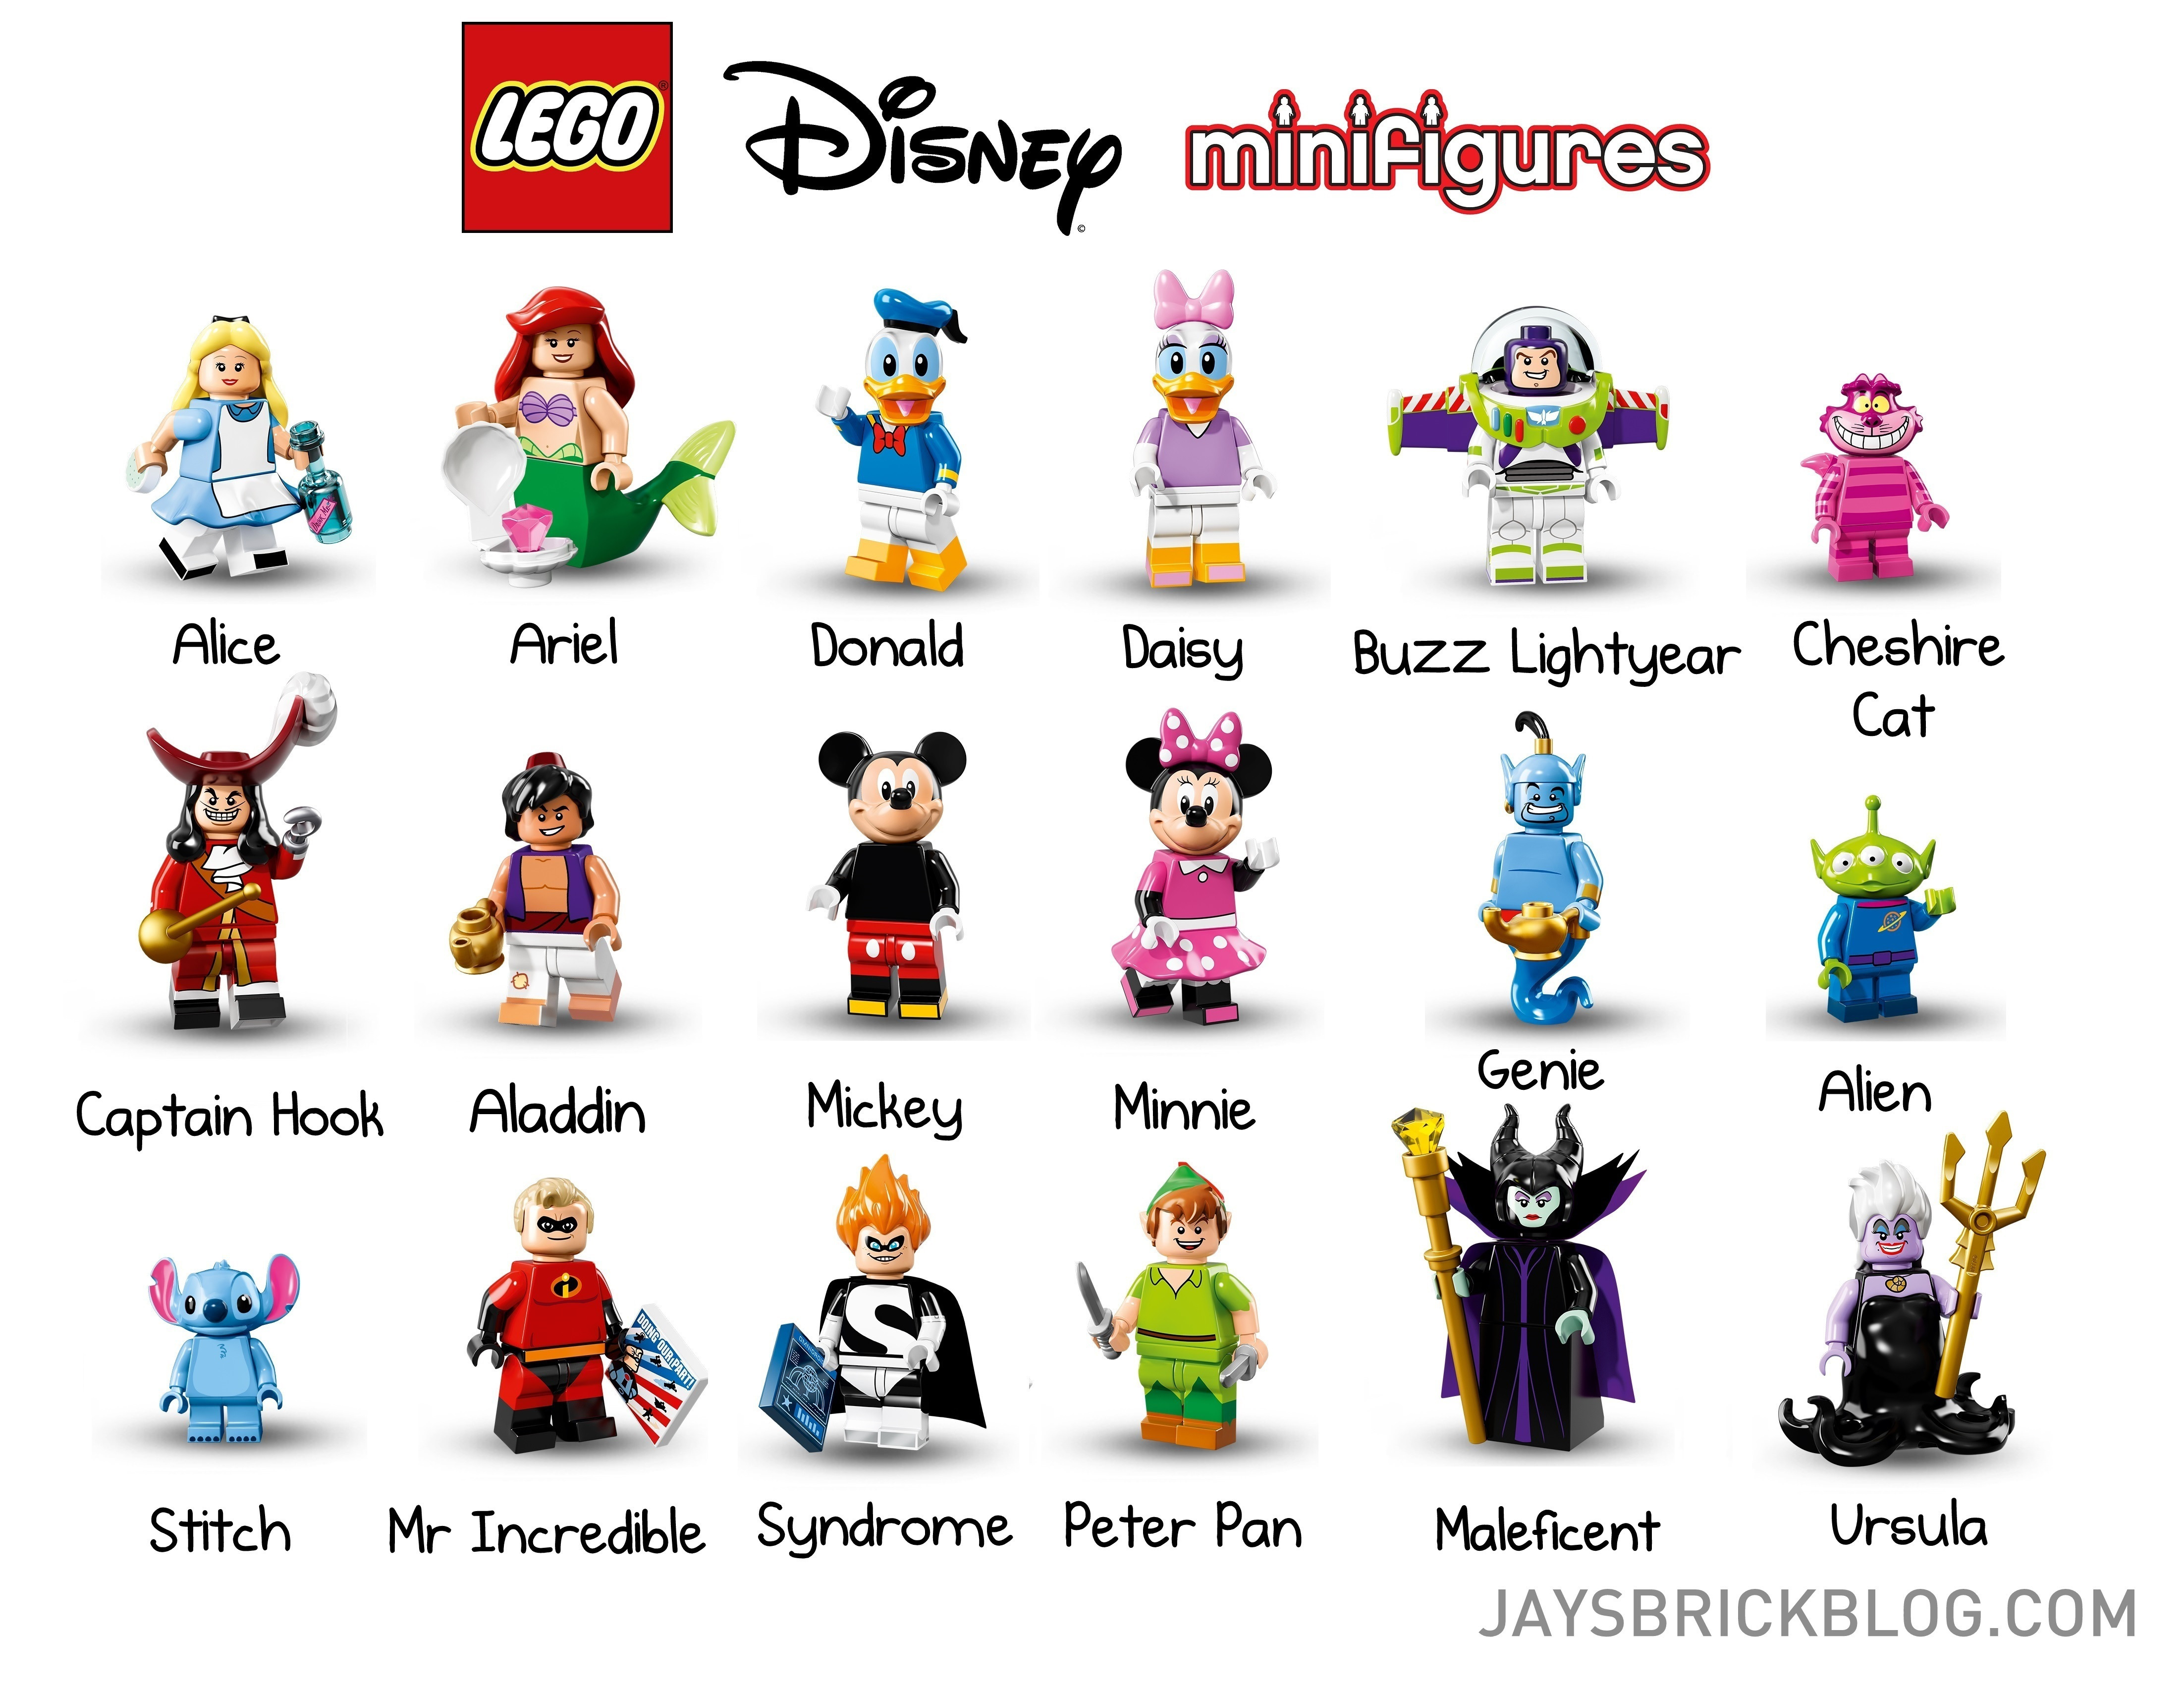 Official reveal of the LEGO Disney Minifigures